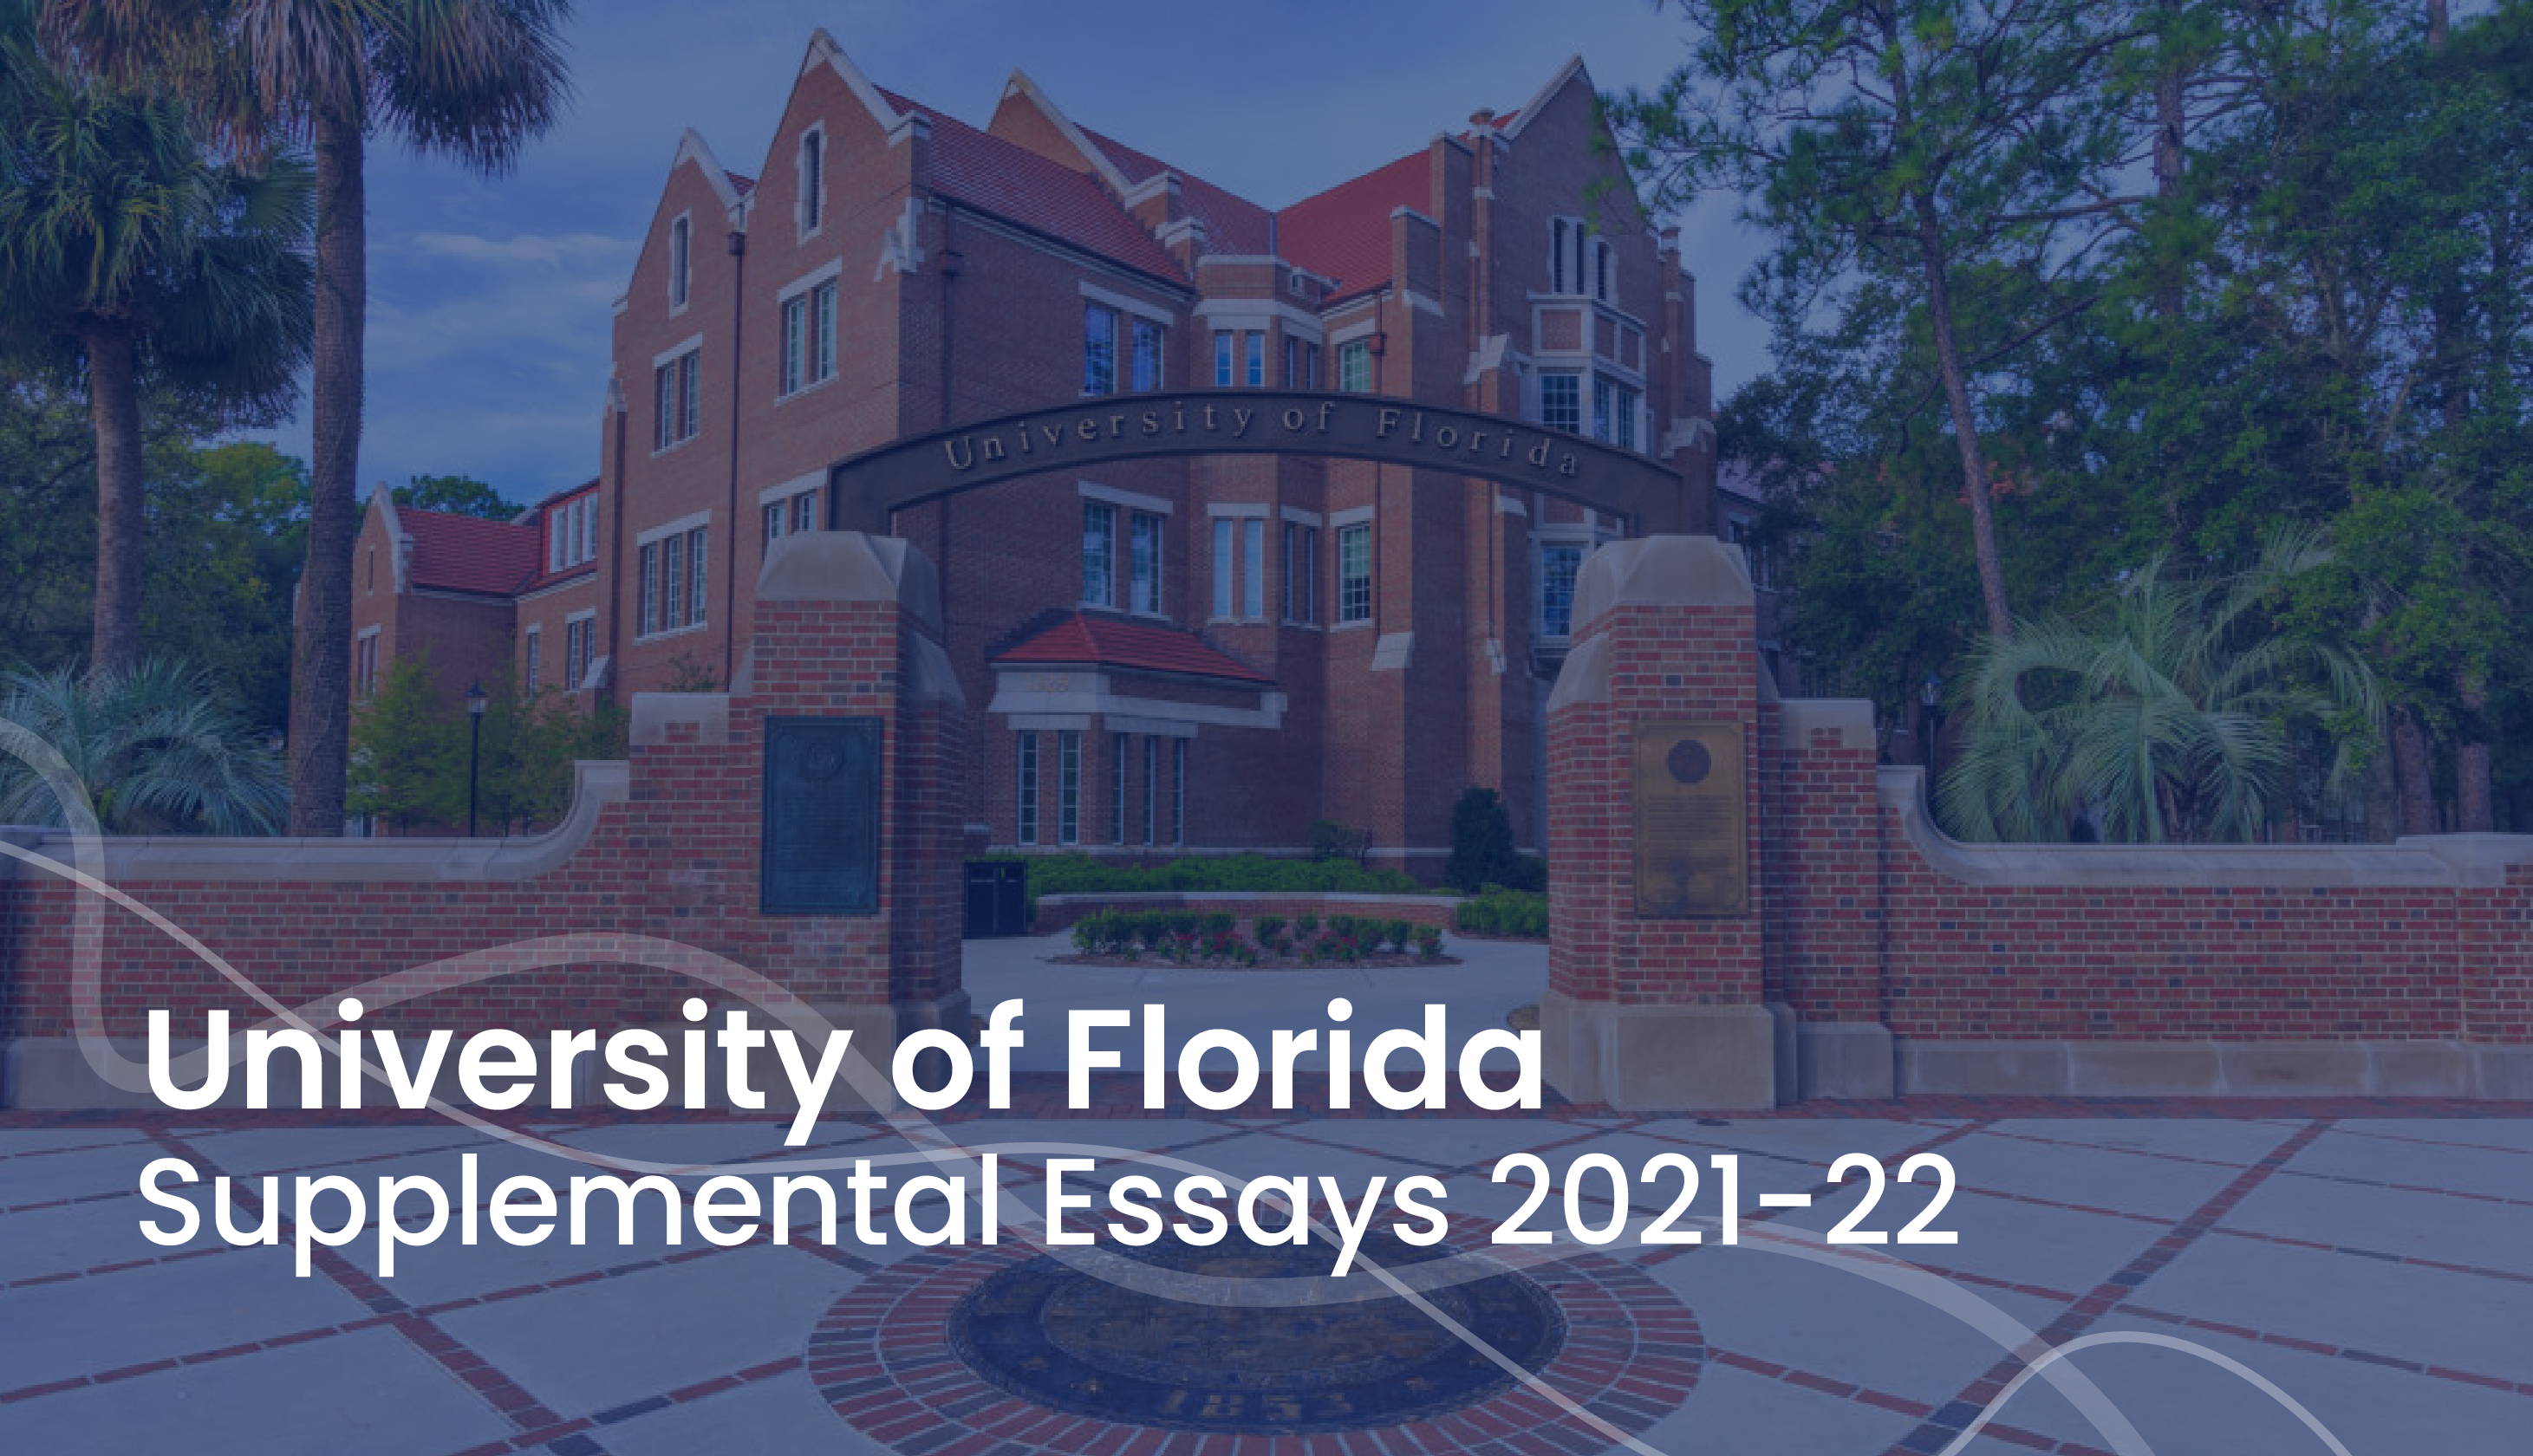 how many supplemental essays does uf have